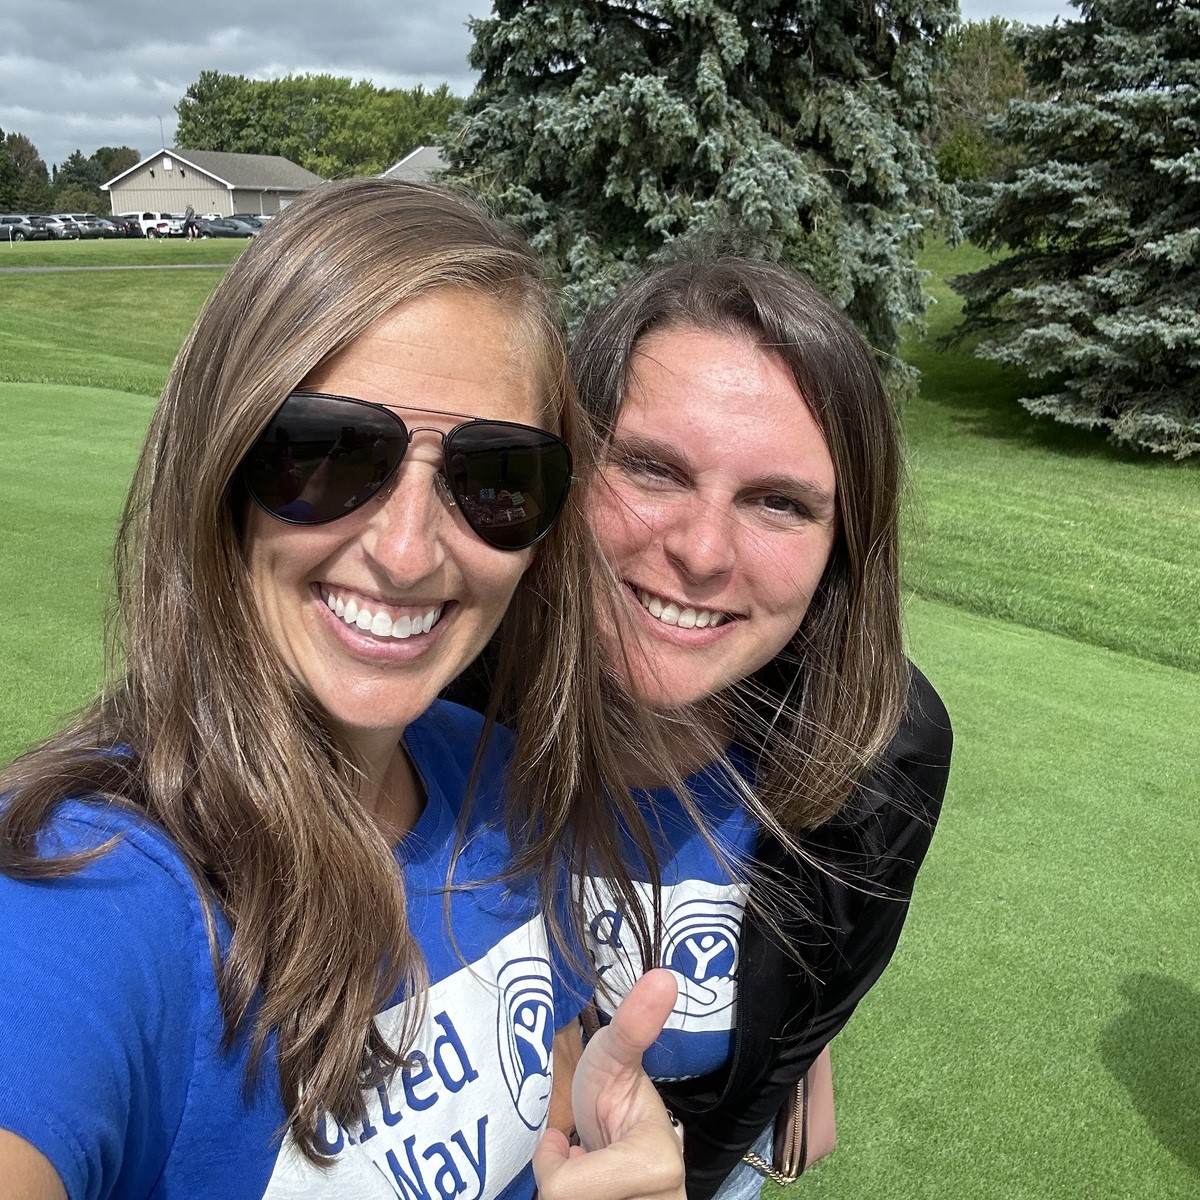 Two Emerging Leaders taking a selfie at the charity golf outing.